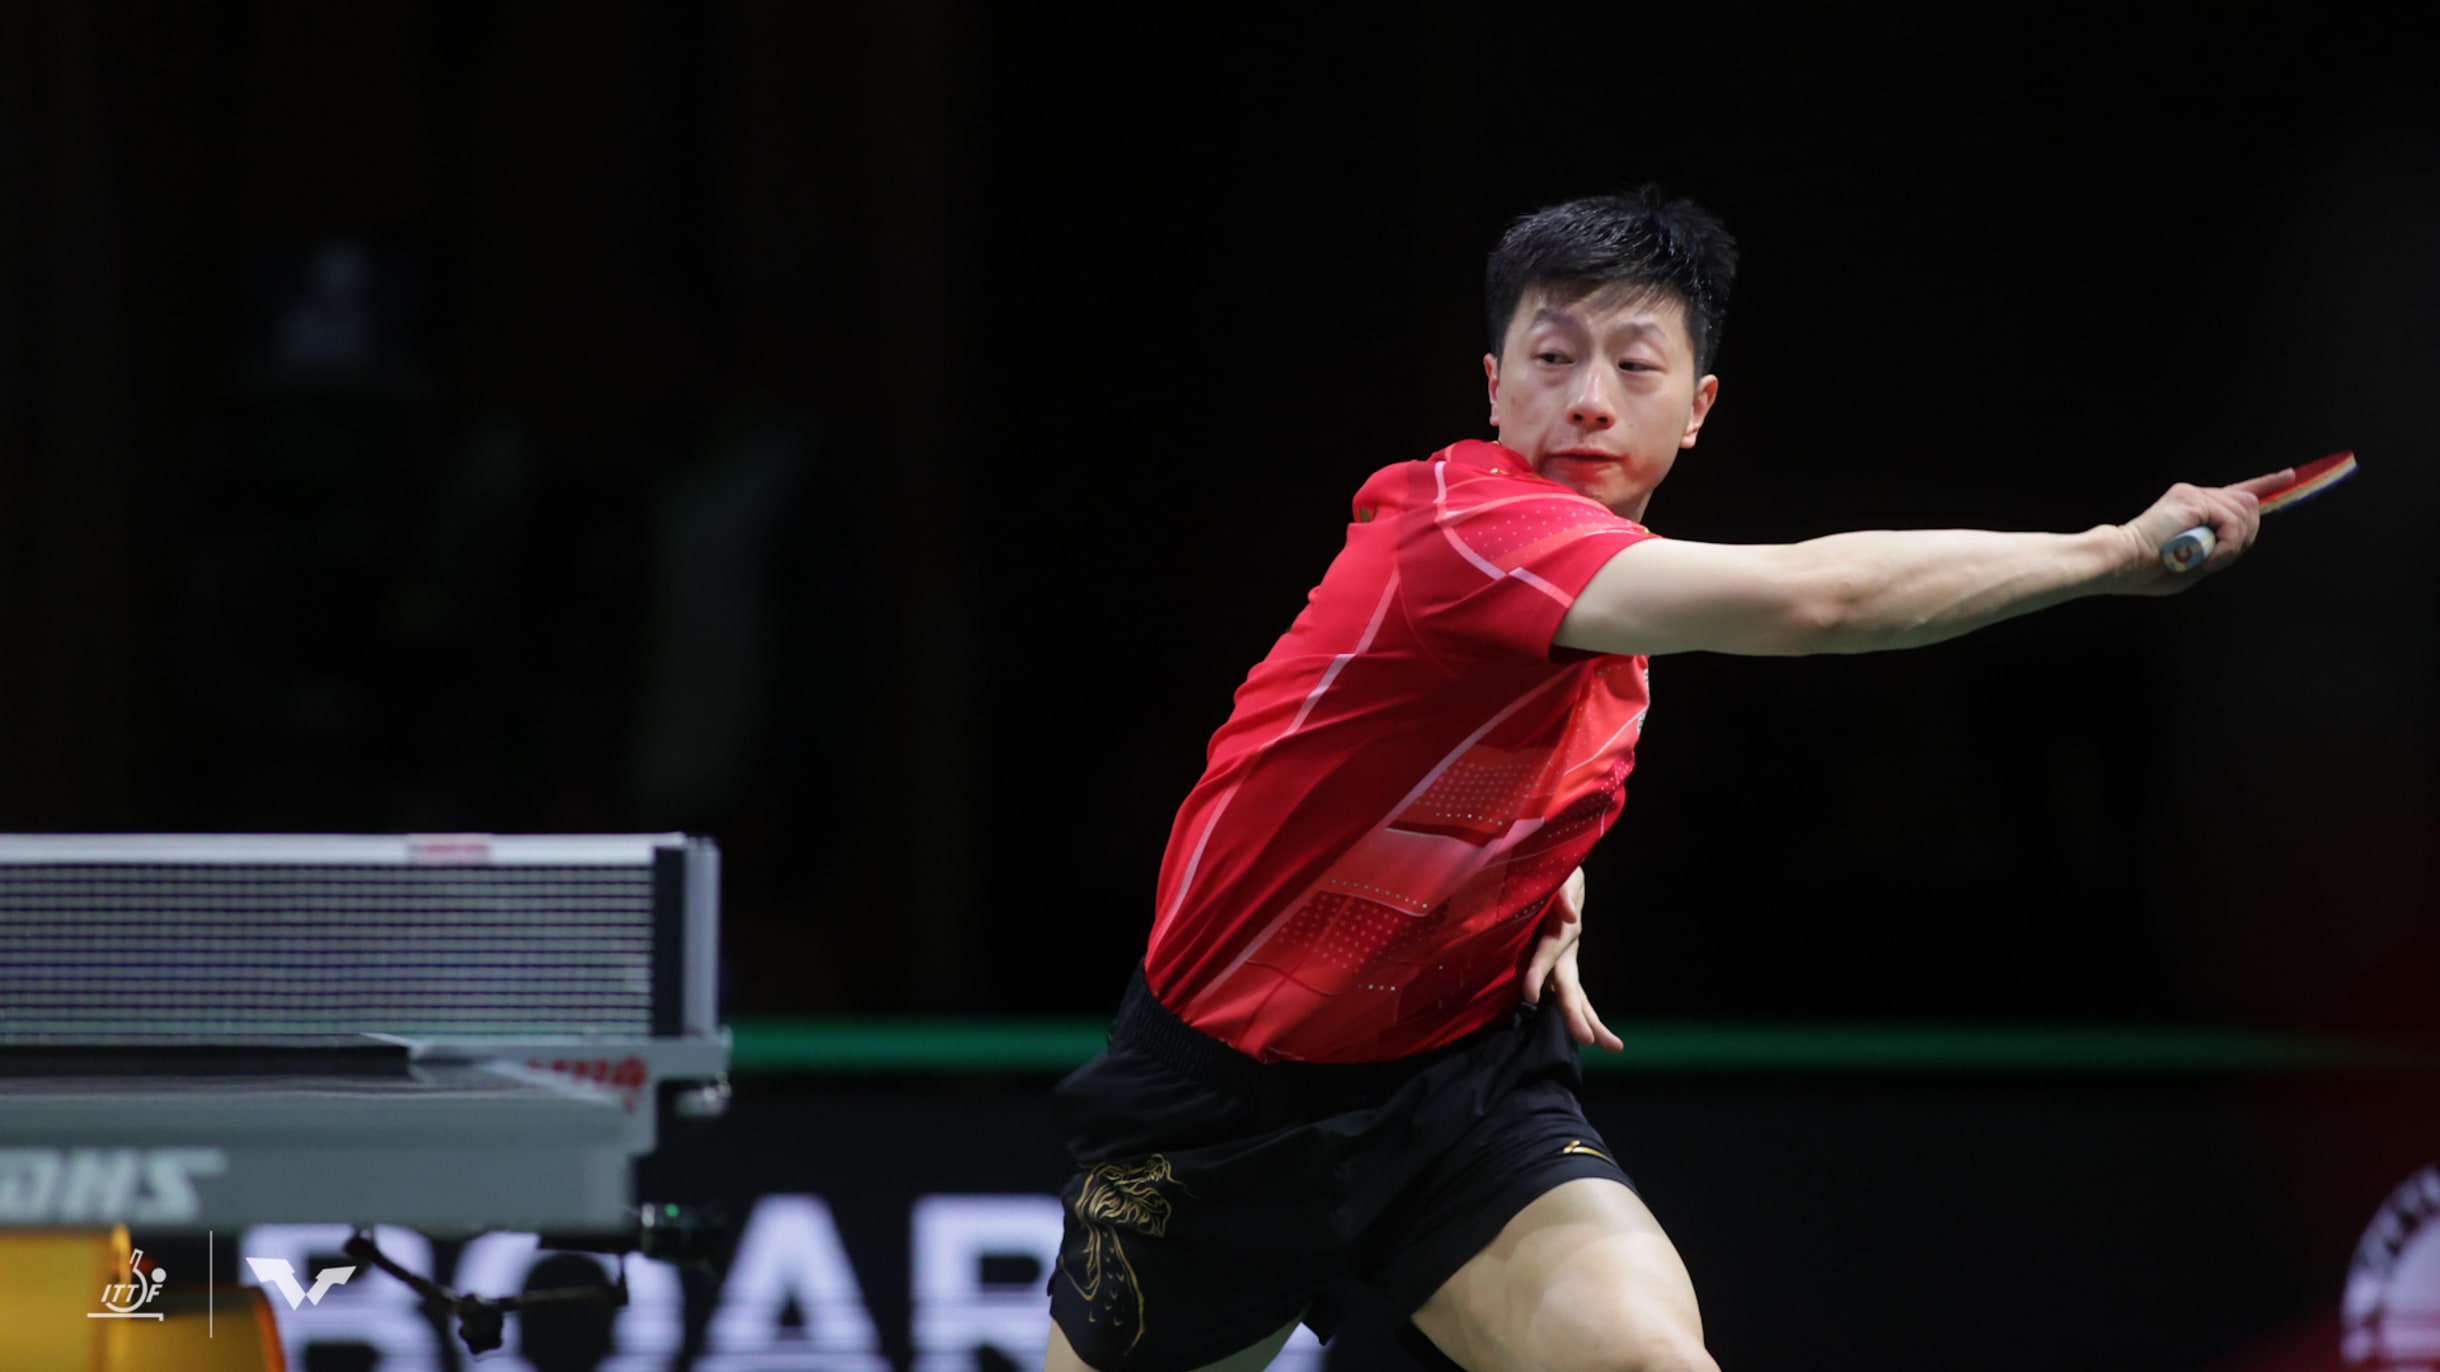 2023 table tennis world championships Chinese stars Fan, Ma and Sun march into last 16 at ITTF World Championships Finals as Möregårdh is knocked out